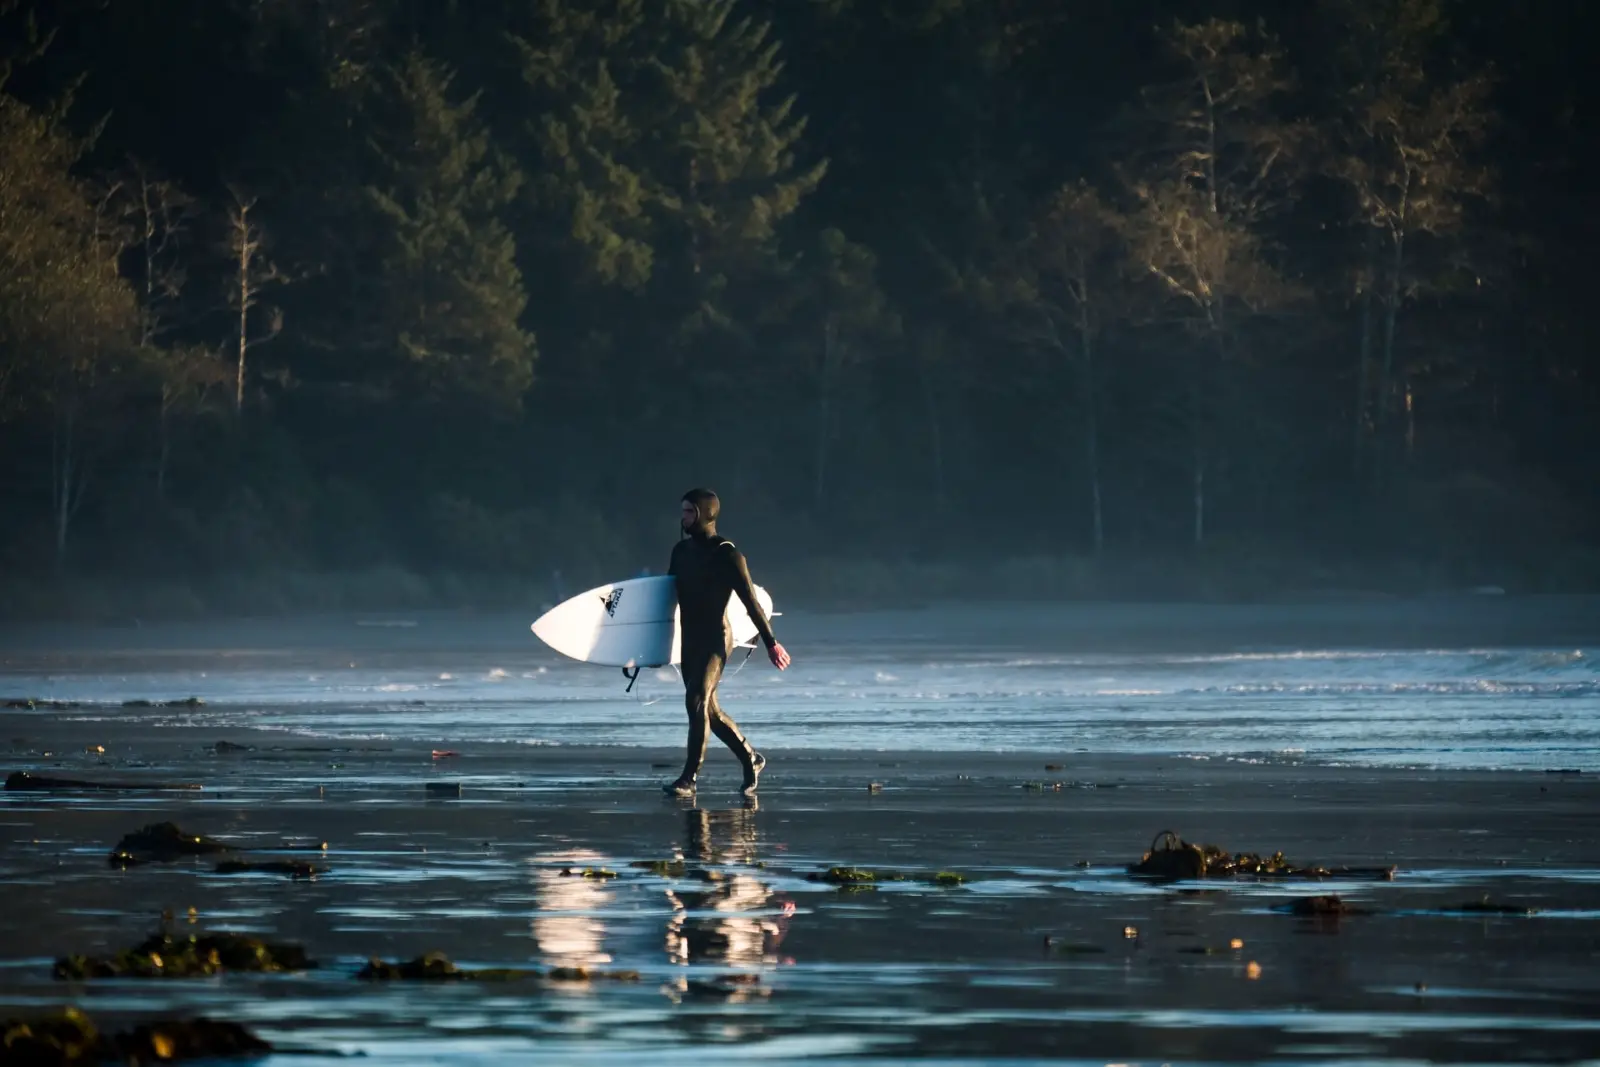 A hooded wetsuit is essential gear for surfing in British Columbia